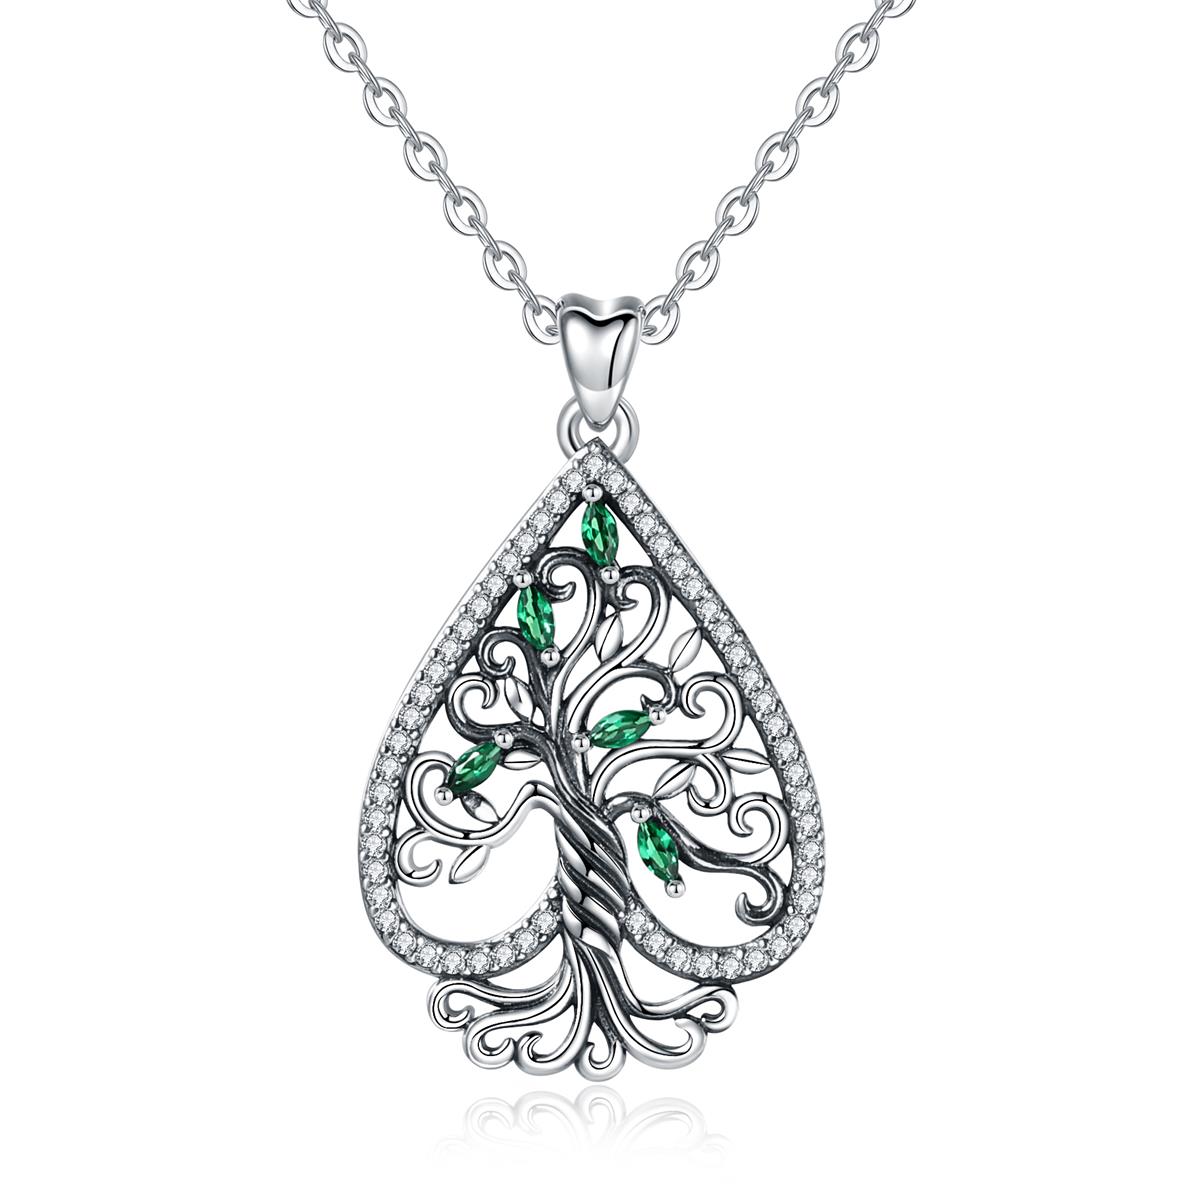 Merryshine Jewelry S925 Sterling Silver Heart Shape Tree of Life Necklace with Green Cubic Zirconia